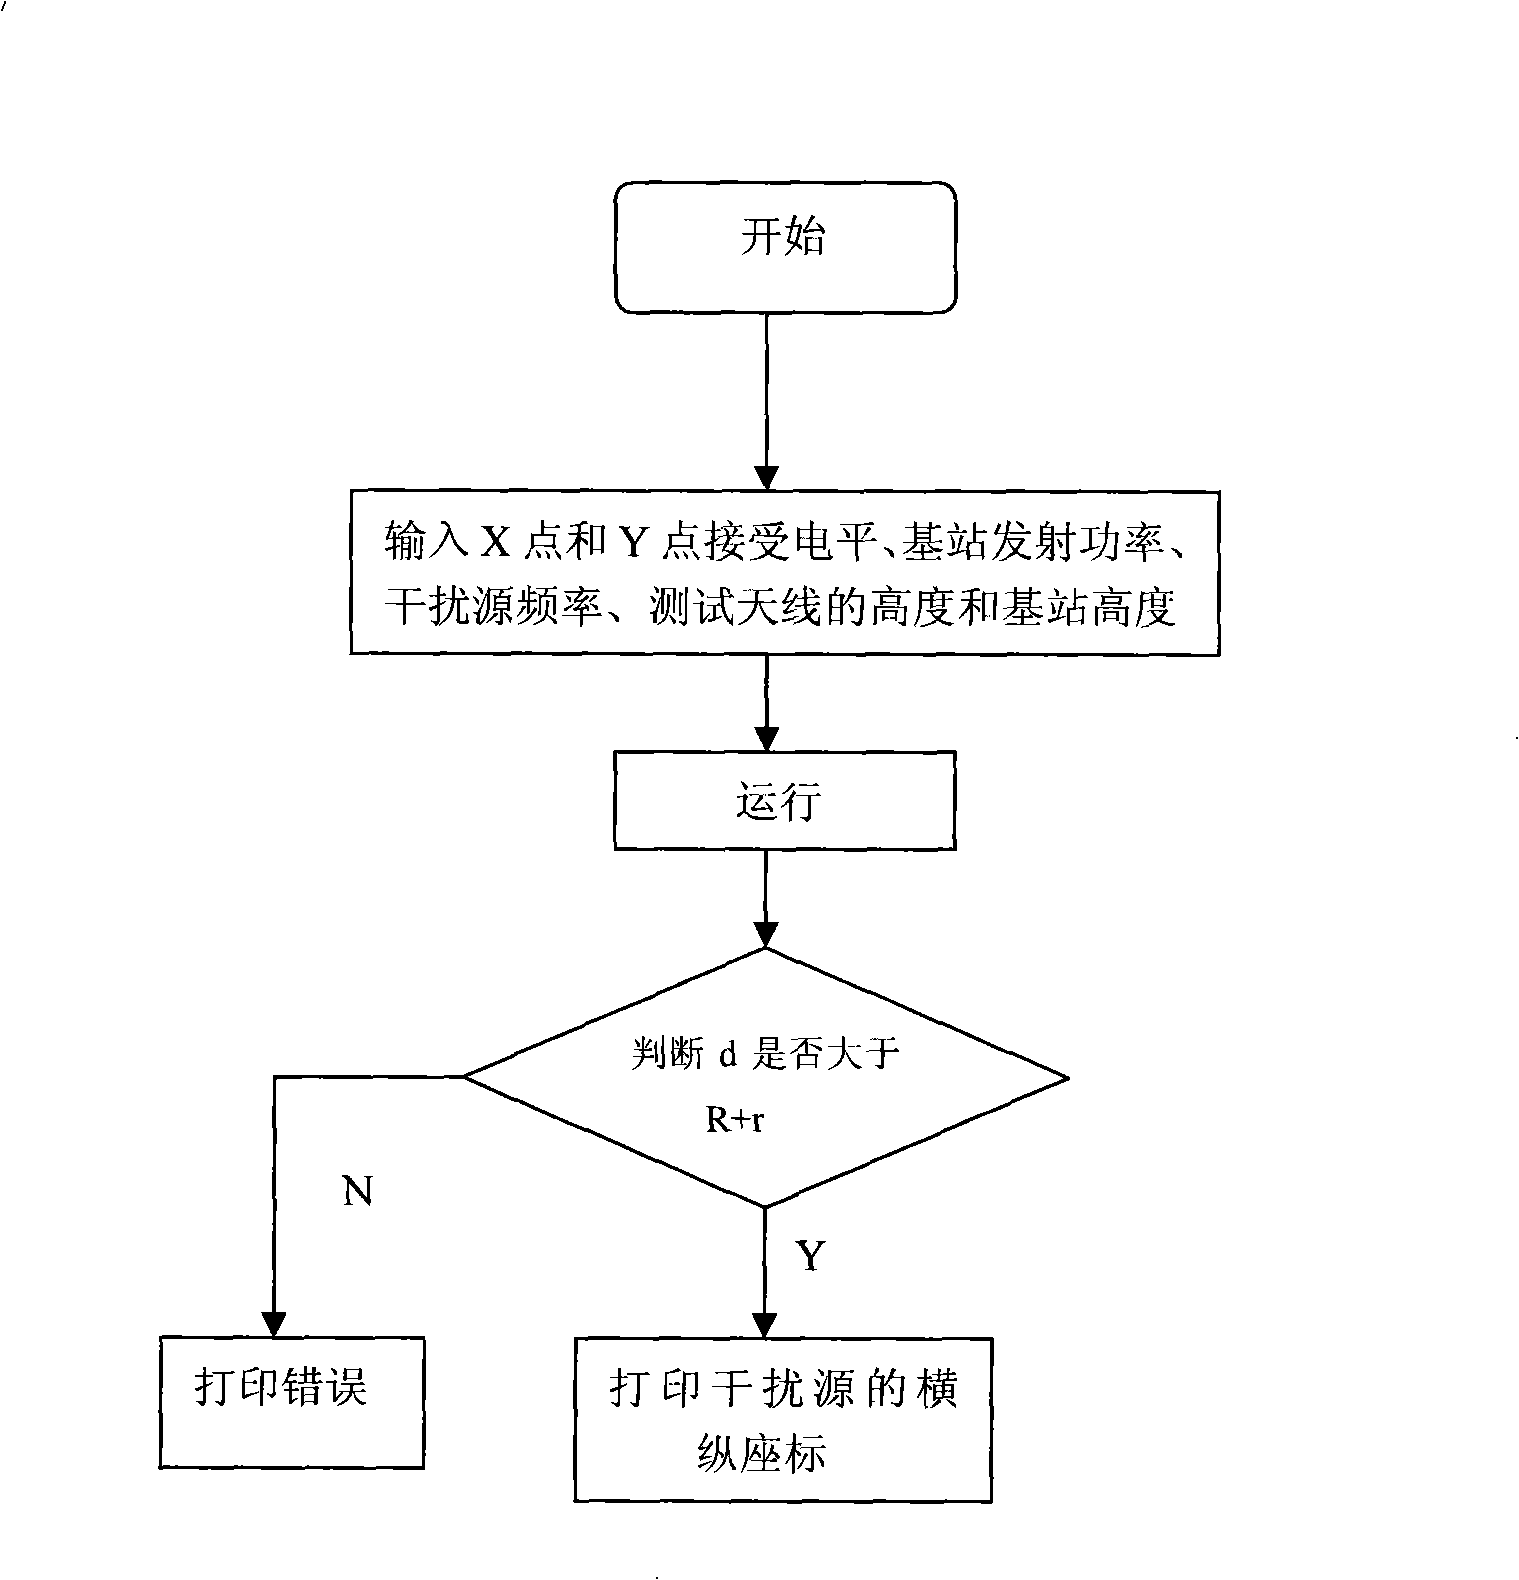 Method for seeking GSM-R interference source